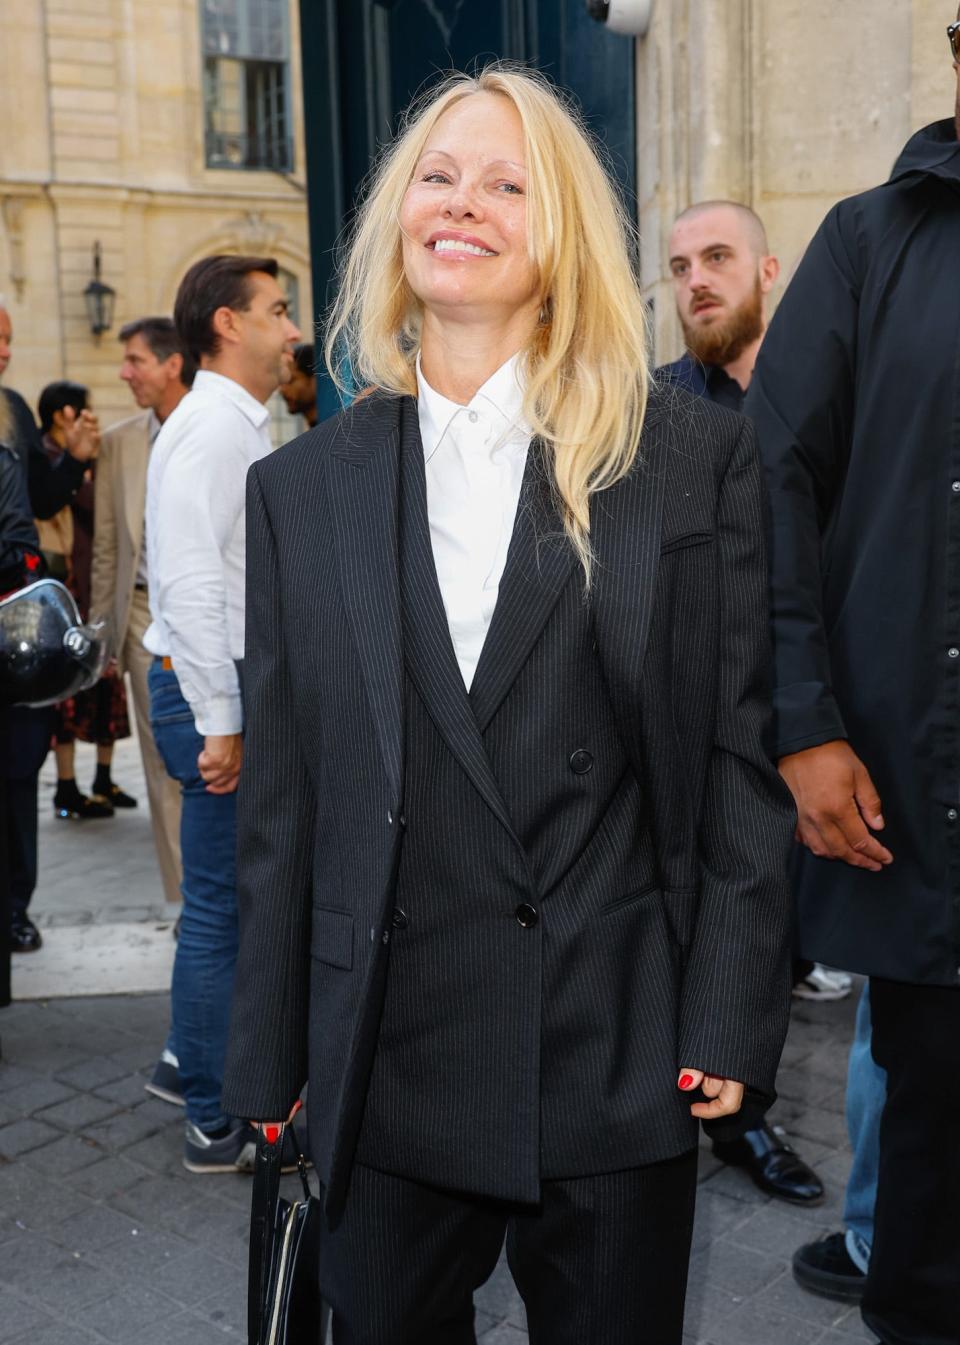 Pamela Anderson went makeup-free at Paris Fashion Week and stole the show